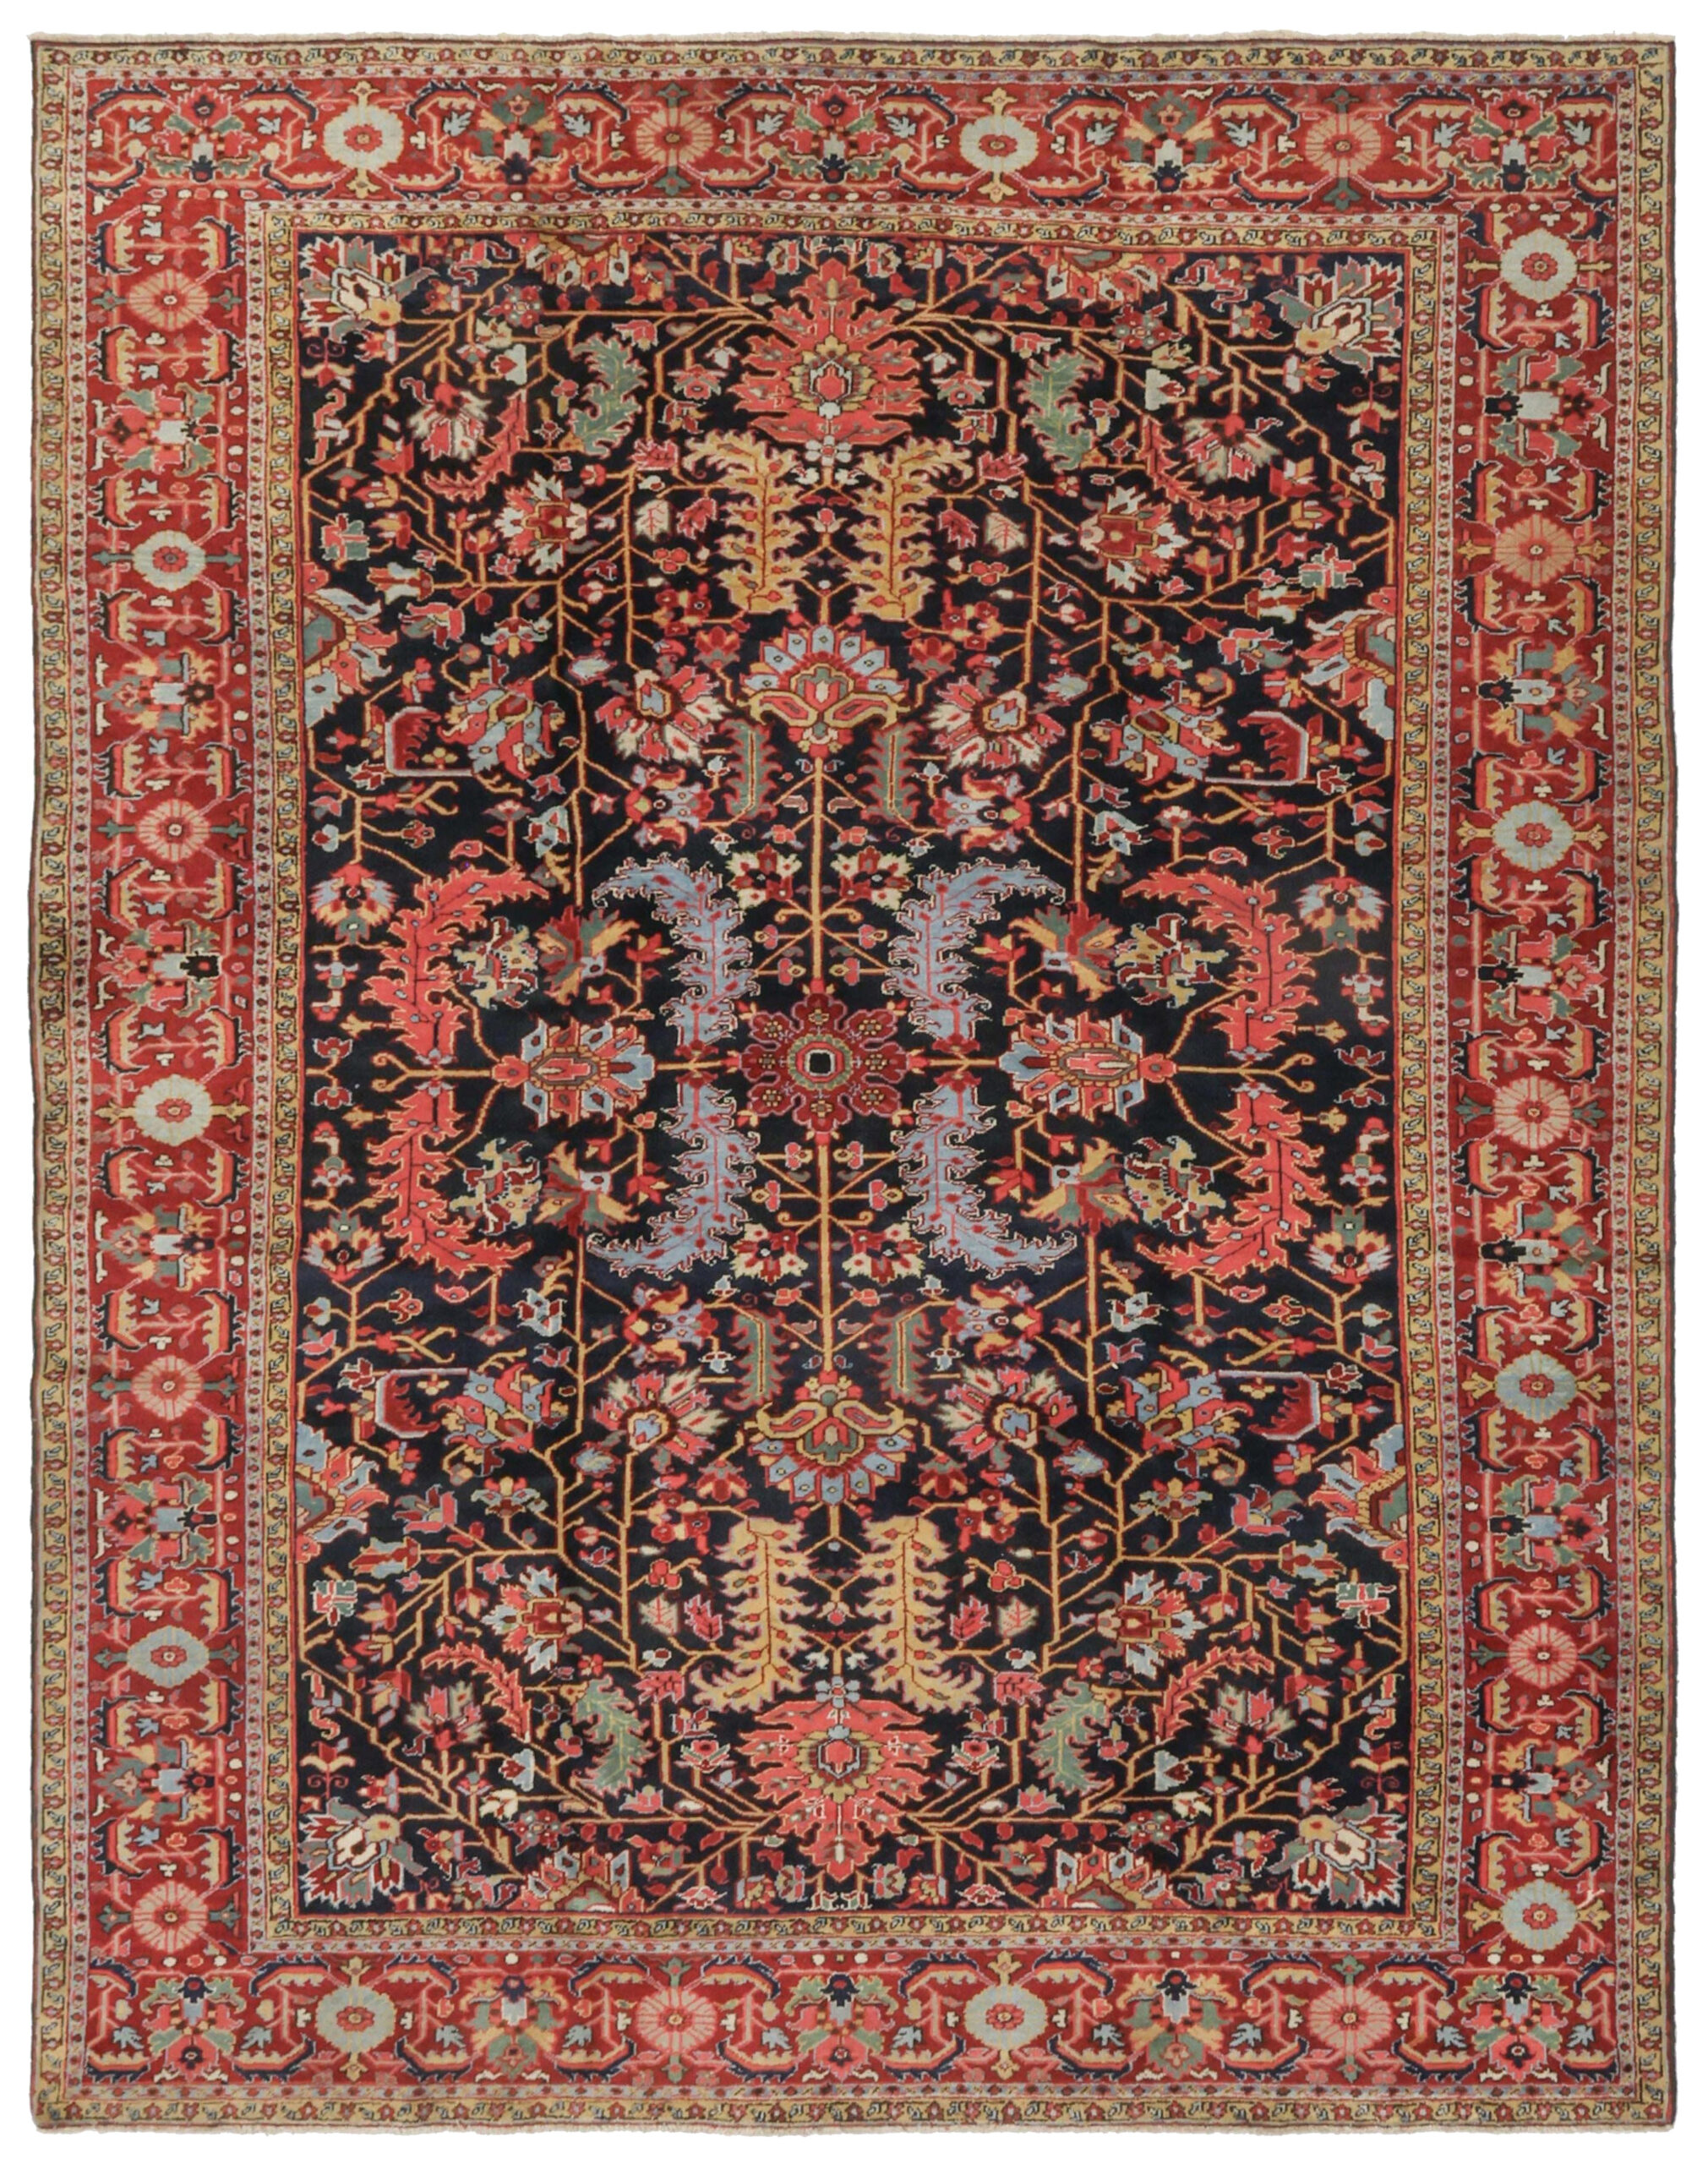 An antique Persian Heriz carpet with coral, light blue and yellow leaves on a navy blue field that is framed by a brick red border. Douglas Stock Gallery offers a wide selection of antique Heriz, Serapi, Karaja and Bakshaish carpets. Antique Persian carpets Boston, Brookline, Newton, Wellesley, South Natick,MA area, antique rugs New England, antique rugs NYC by appointment